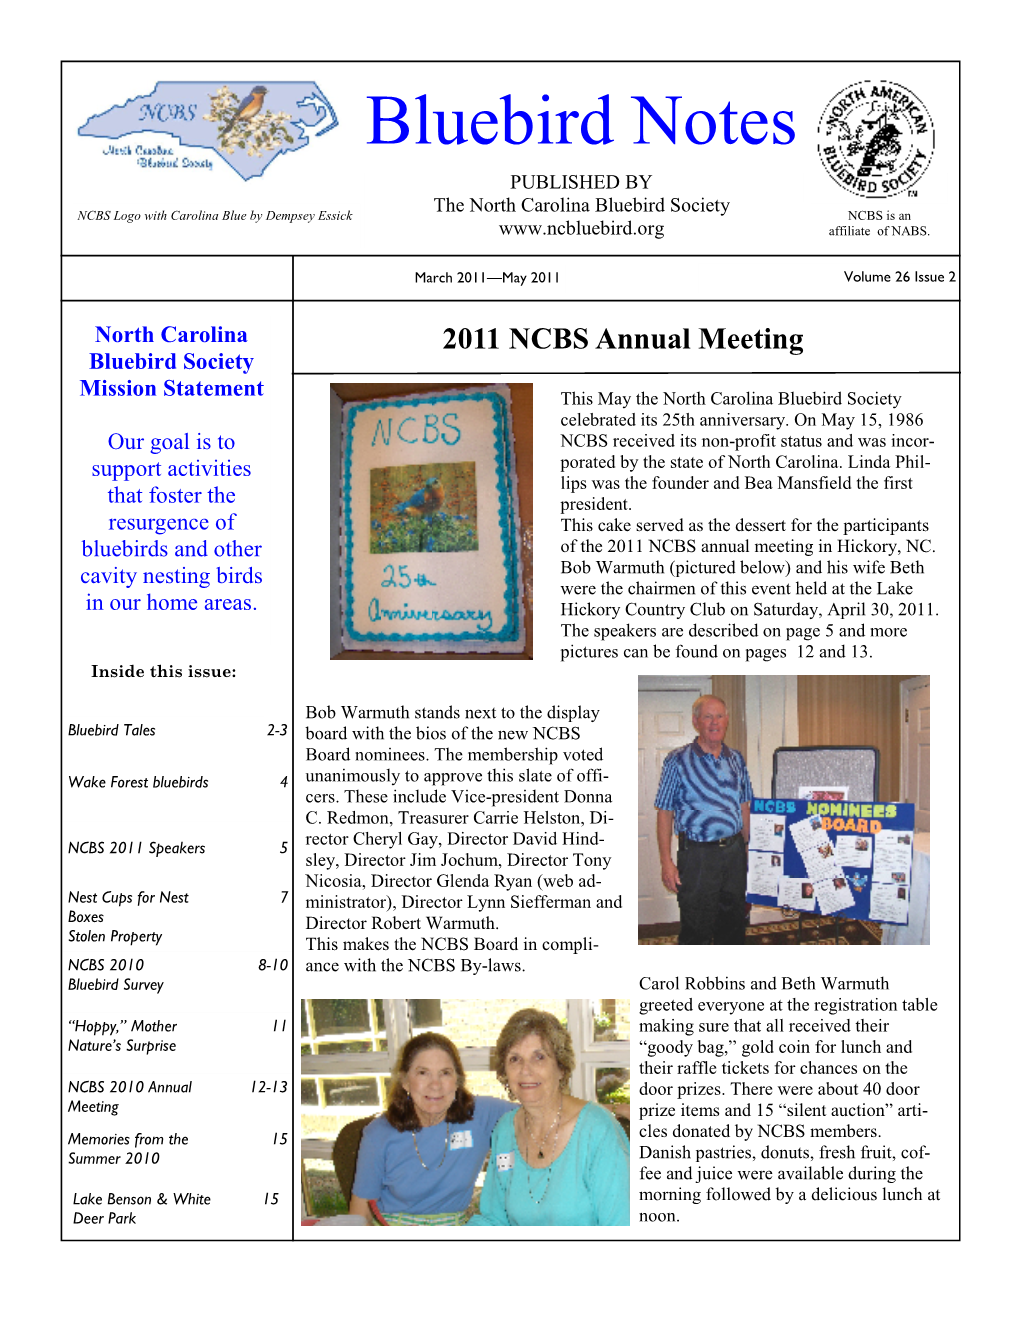 May 2011 Volume 26 Issue 2